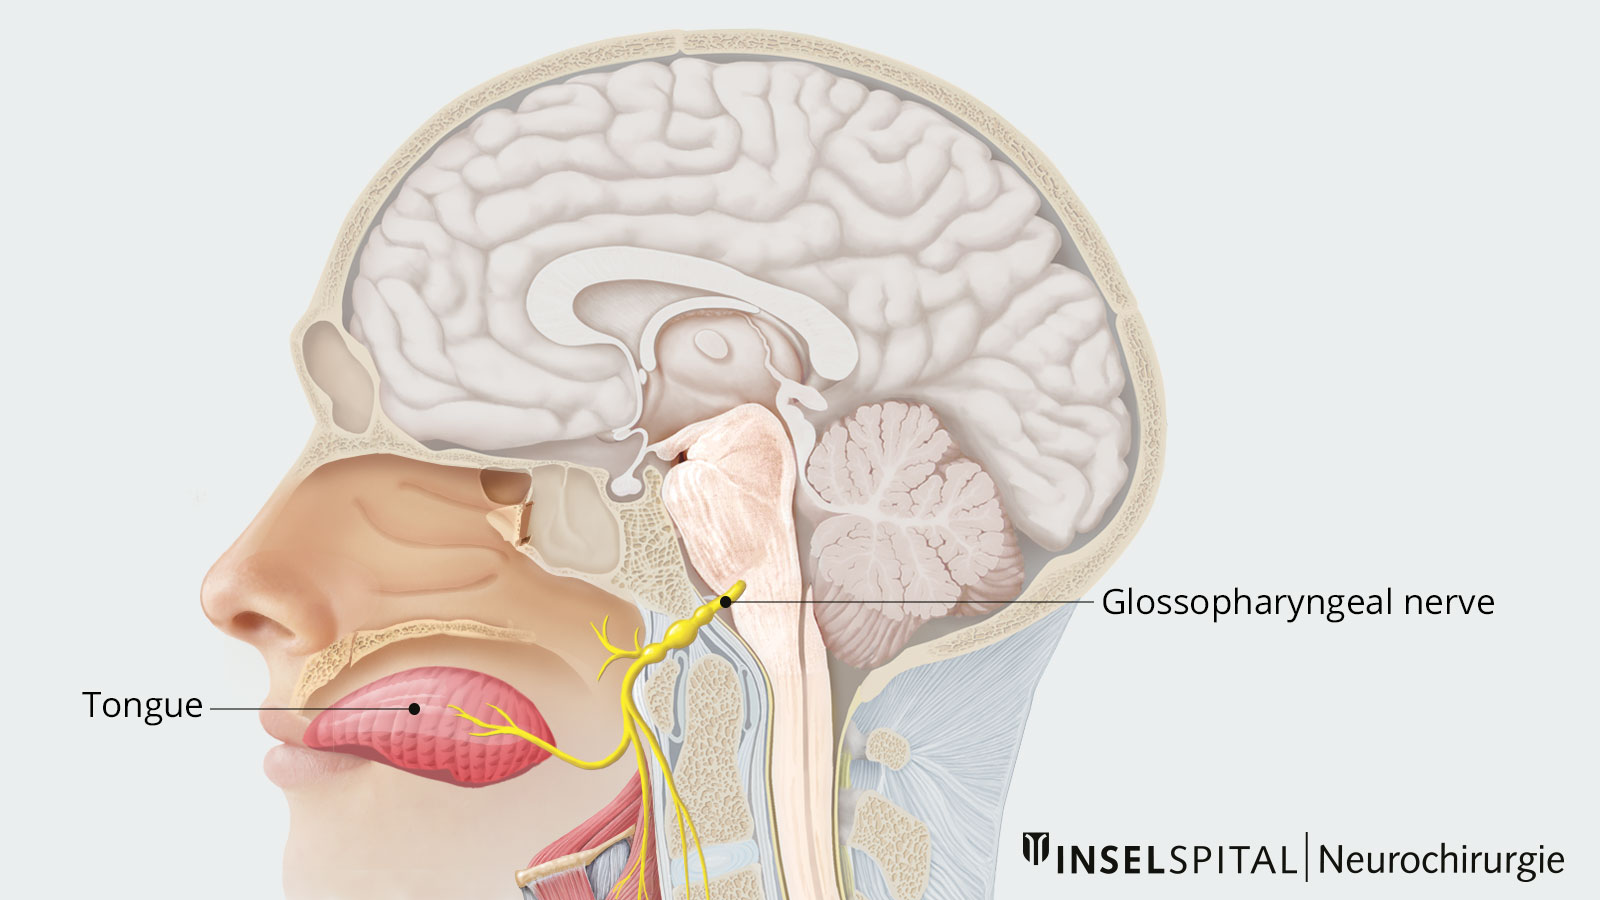  Anatomical overview drawing of the glossopharyngeal nerve